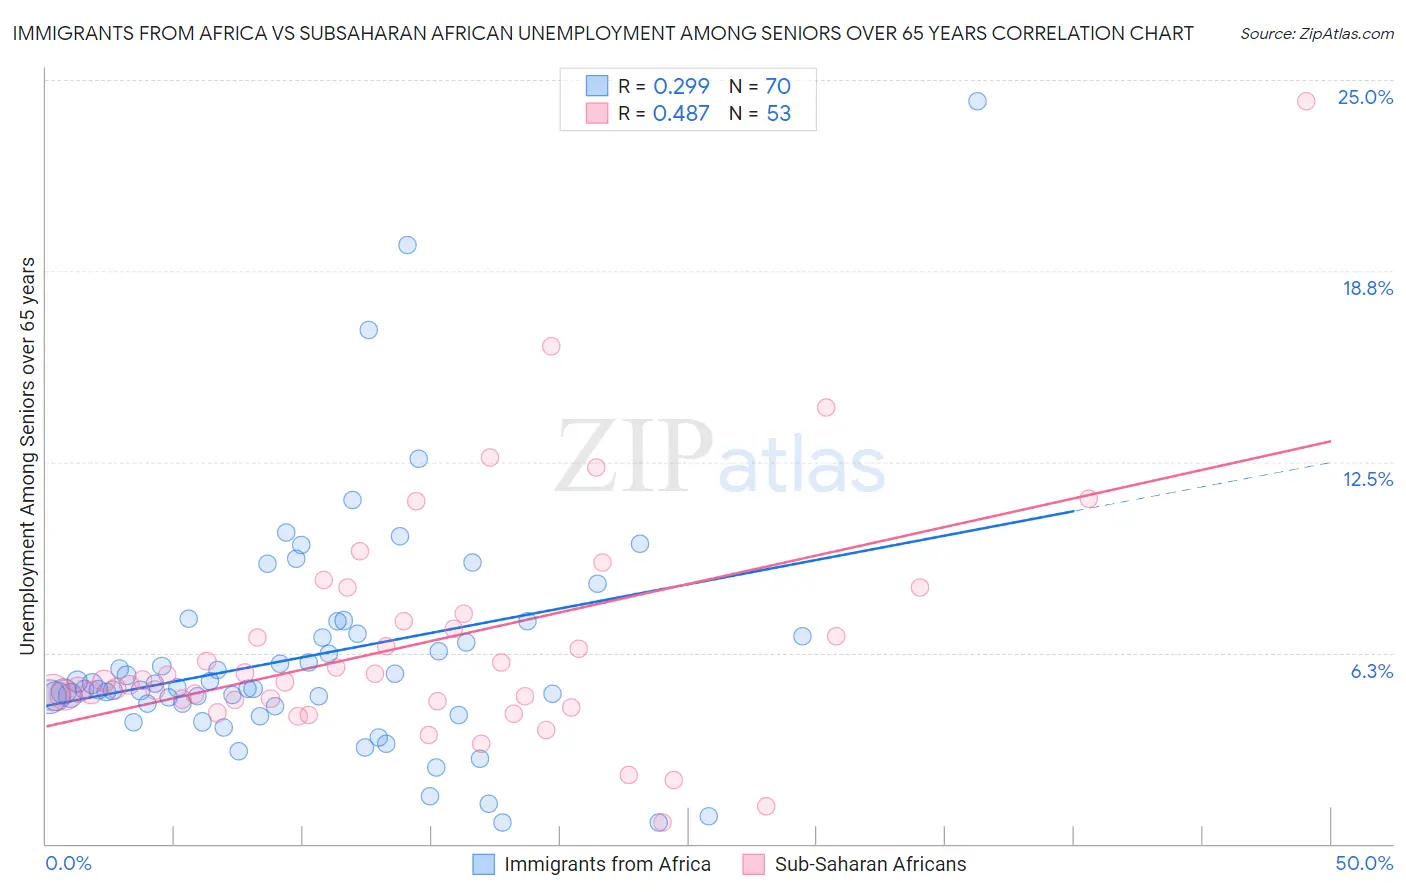 Immigrants from Africa vs Subsaharan African Unemployment Among Seniors over 65 years